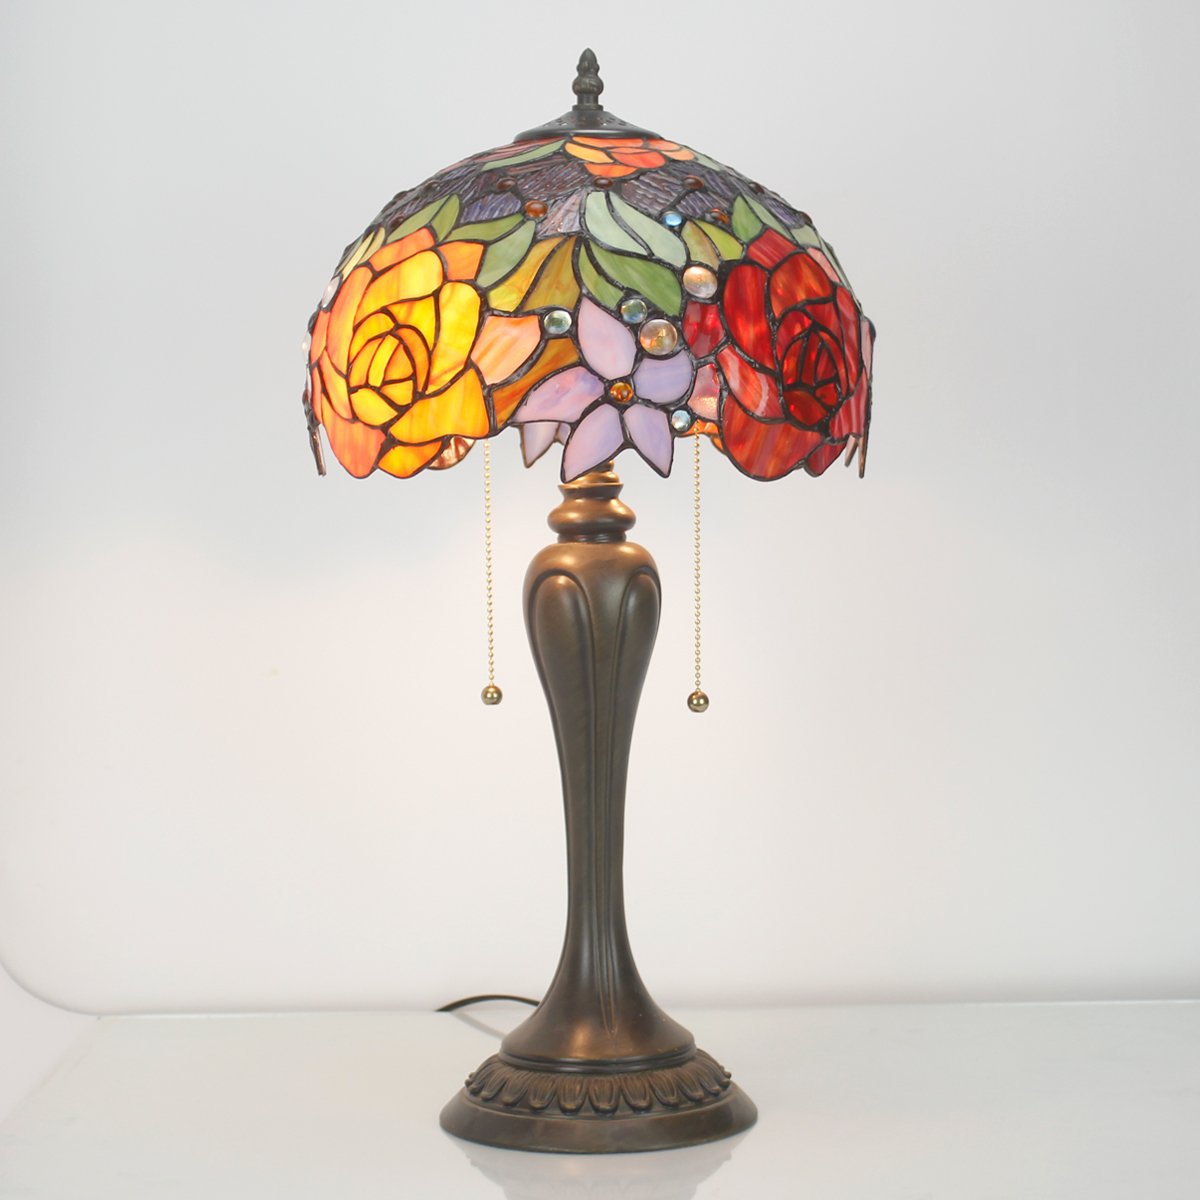 WERFACTORY Tiffany Lamp Stained Glass Table Lamp Red Rose Flower Bedside Desk Reading Light 12X12X22 Inches Decor Bedroom Living Room Home Office S001 Series